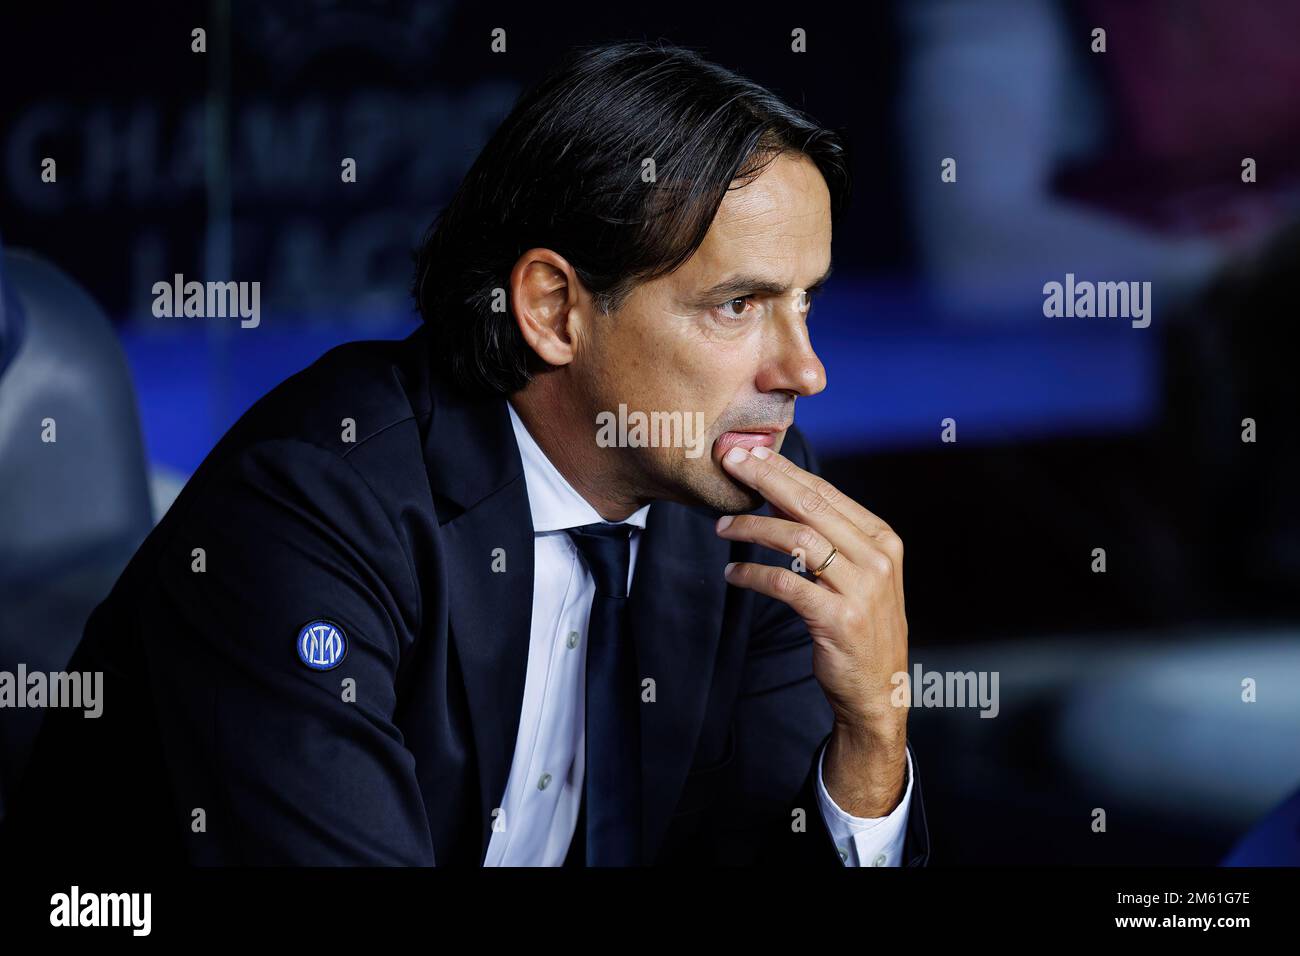 BARCELONA - OCT 13: The manager Simone Inzaghi in action during the Champions League match between FC Barcelona and FC Internazionale at the Spotify C Stock Photo